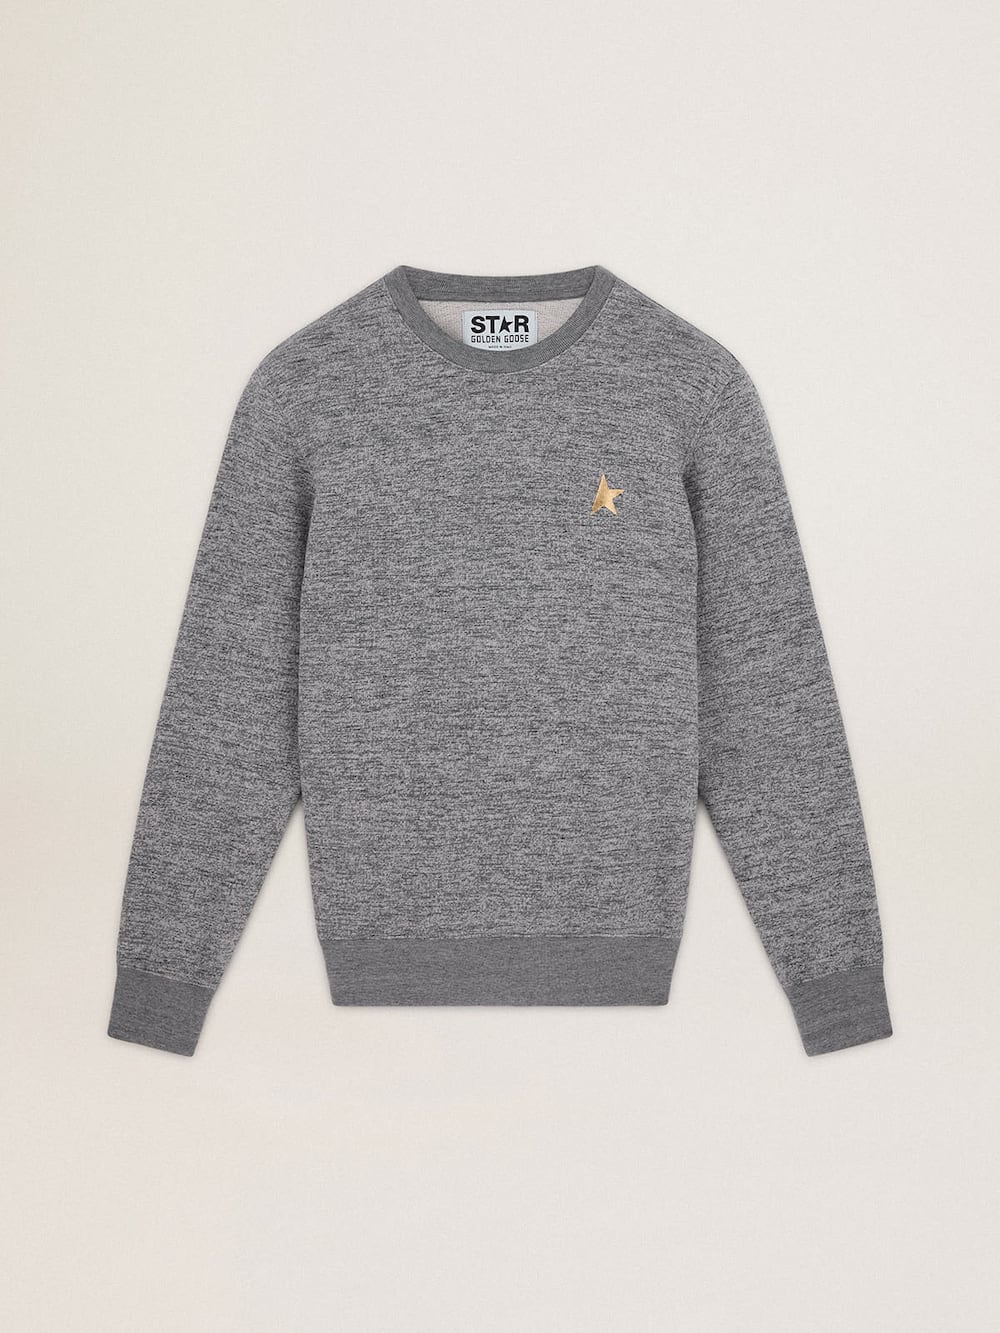 Golden Goose - Men's mélange gray cotton sweatshirt with gold star on the front in 